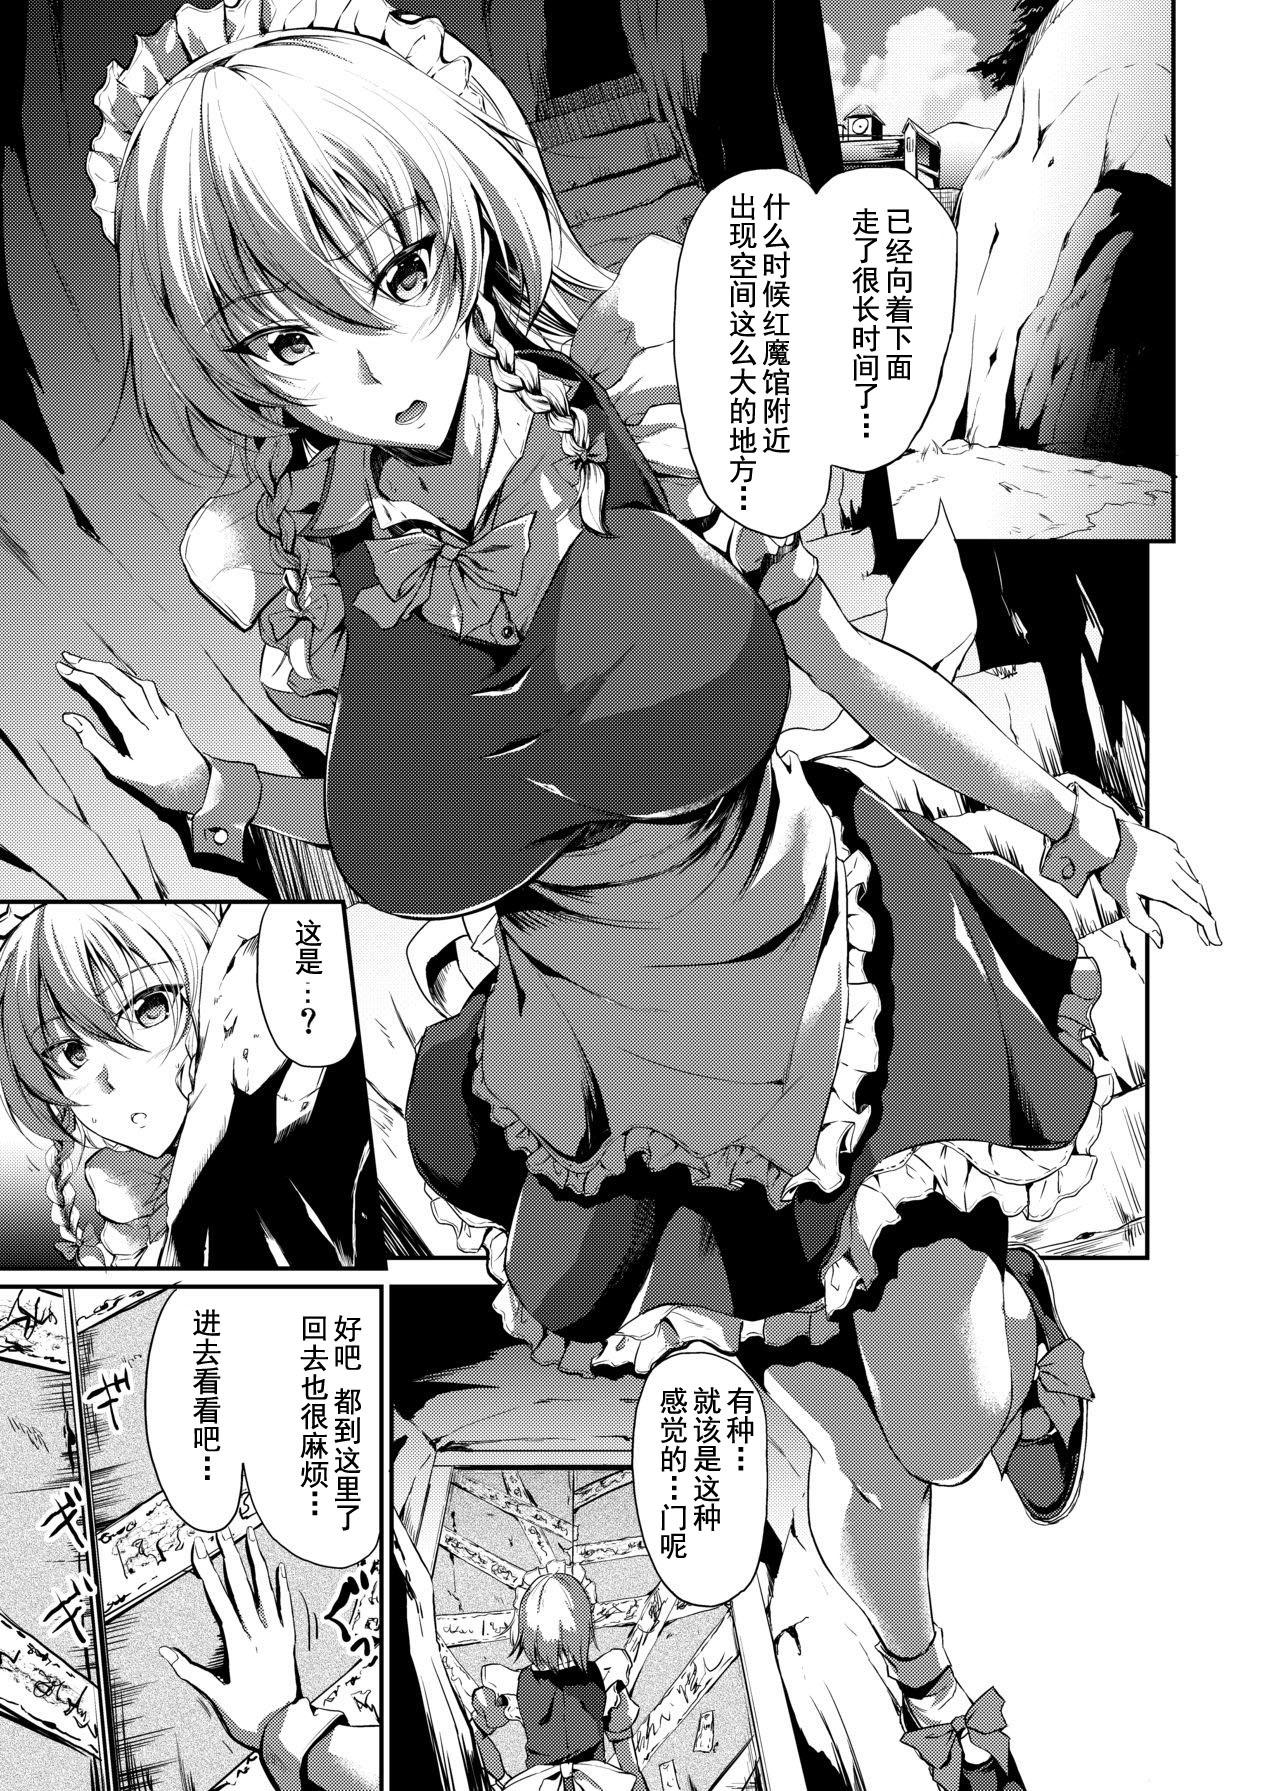 Spoon Ero Trap Dungeon: HELL - Touhou project Brasileiro - Page 3